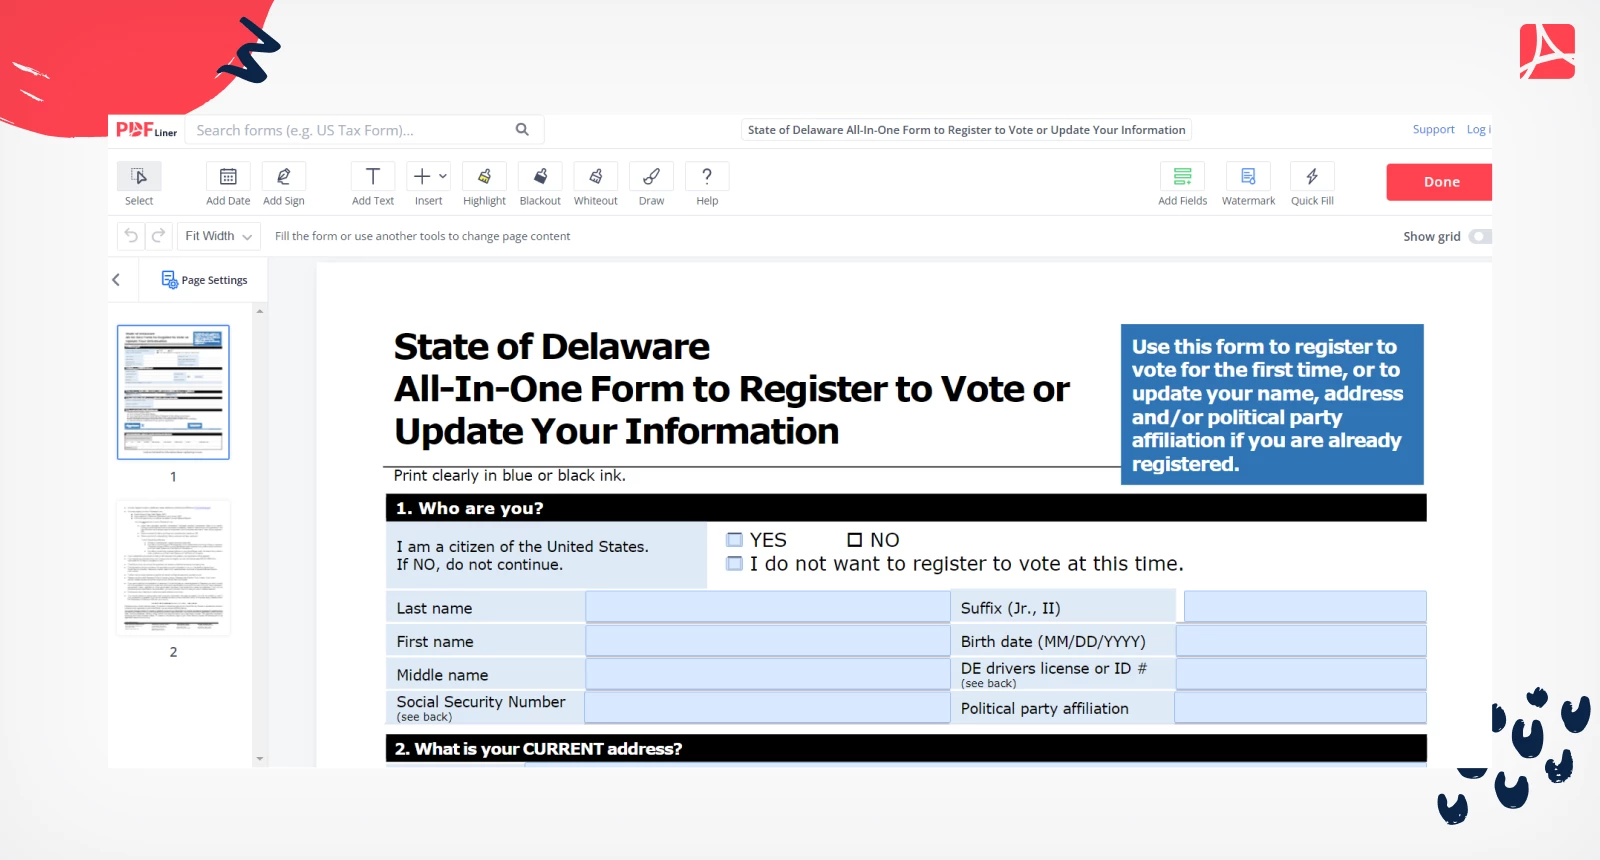 State of Delaware All-In-One Form to Register to Vote on PDFLiner